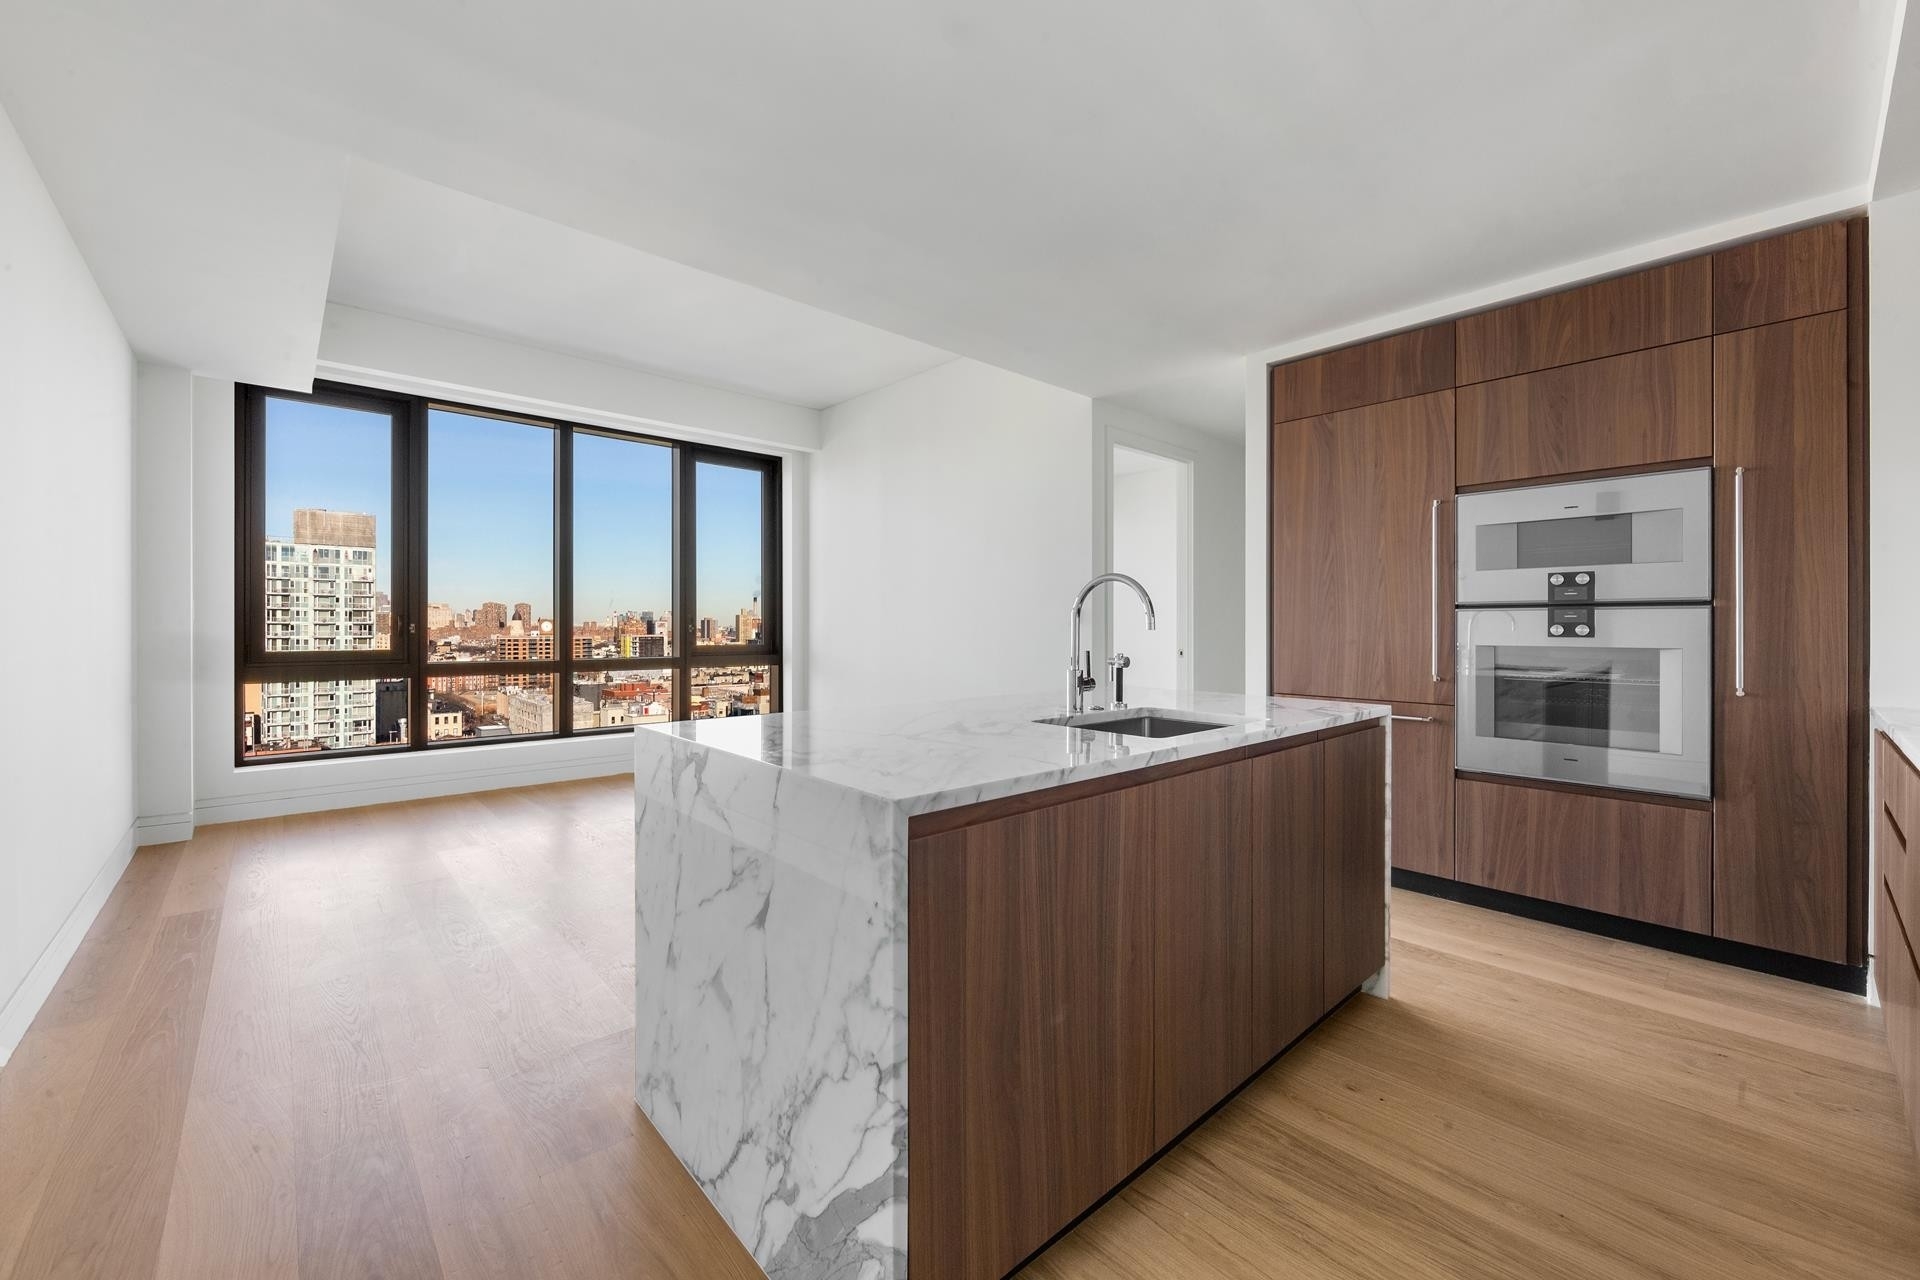 Condominium for Sale at Essex Crossing, 242 BROOME ST, 14D Lower East Side, New York, New York 10002